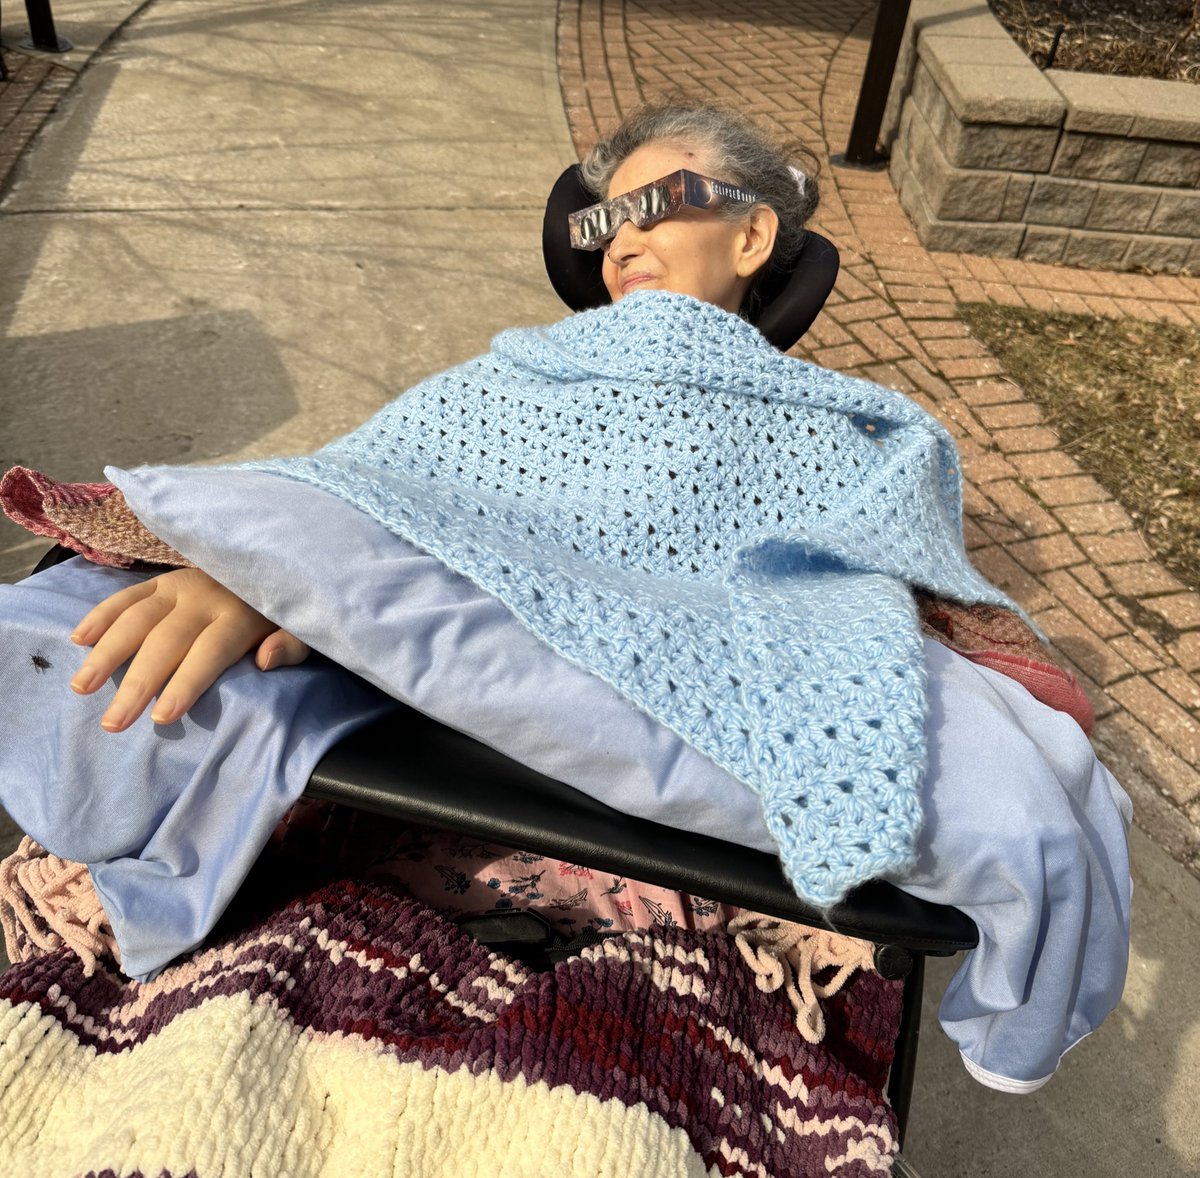 Mini update over at gofund.me/cb8362a5 The short version: MaryAnn is back at SVH & was able to go outside for a glimpse of the eclipse… #maryannharris #charlesdint #harrisdelintrecovery #powassan #wearenewford